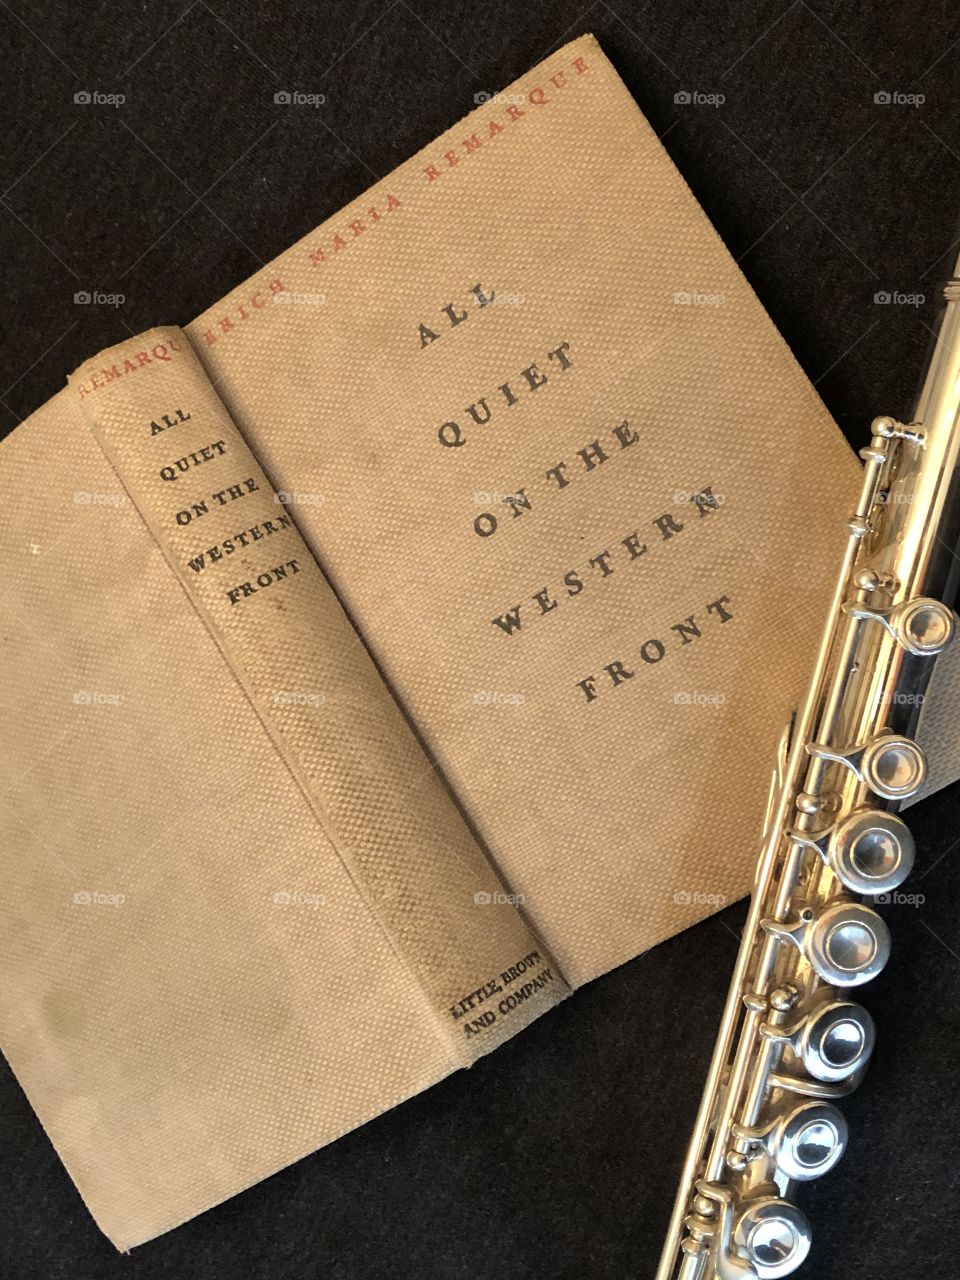 Ironic book title and flute